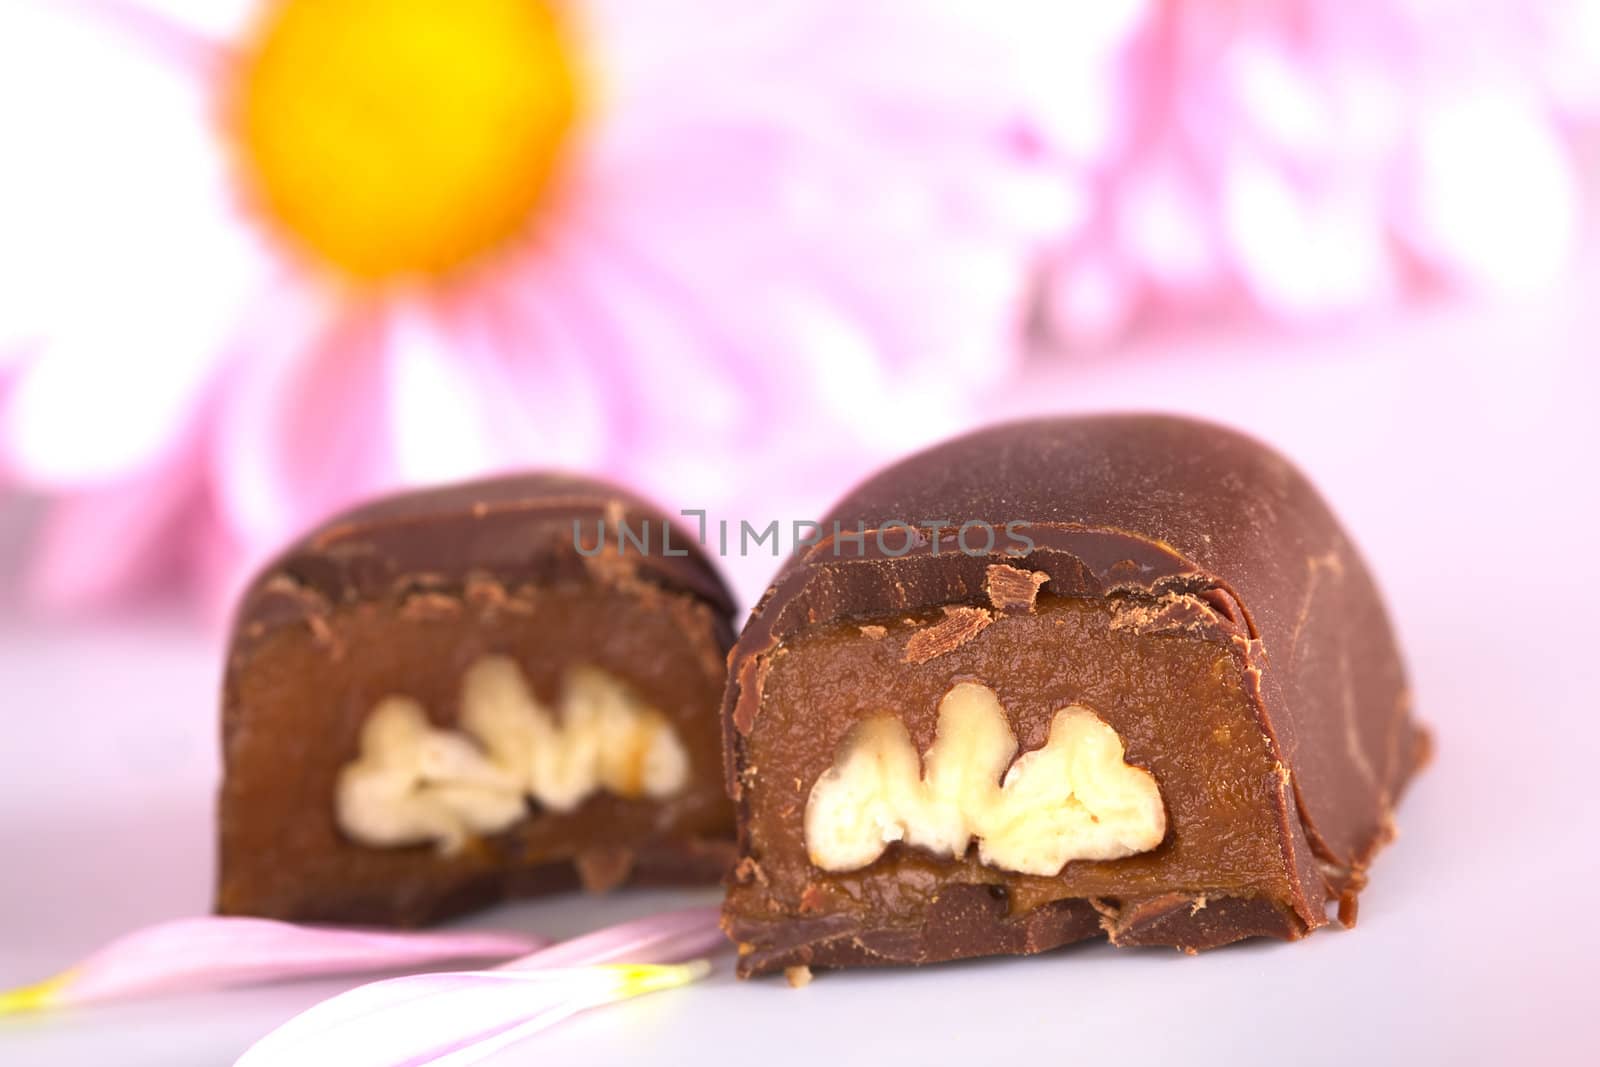 Two pecan nut truffle halves with pink flowers in the back (Selective Focus, Focus on the front upper corner of the right truffle half)